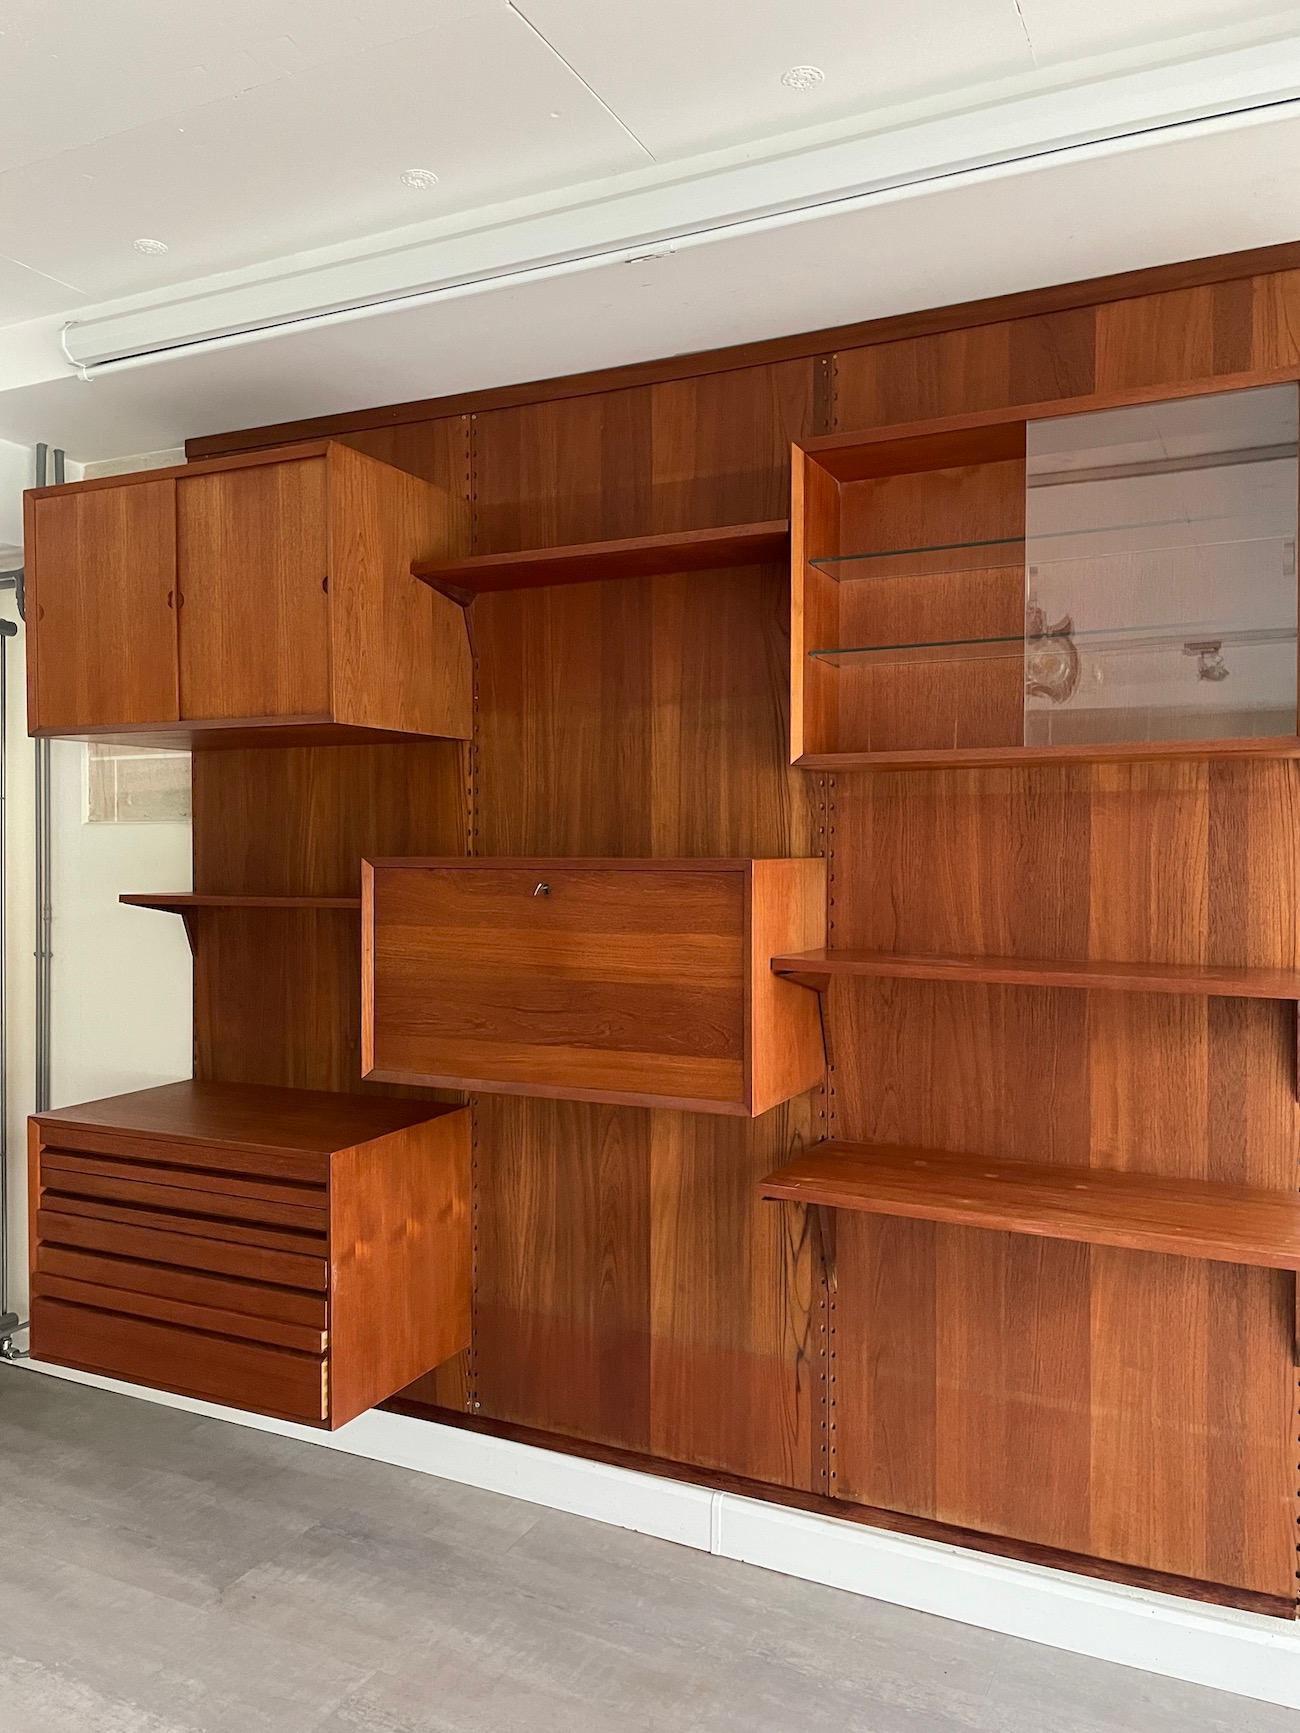 Scandinavian shelf by Poul Cadovius (Denmark, 1911-2011). Teak version with three wall panels supporting several shelves and boxes.

 This wall system is composed of :
- 4 shelves 
- 1 box with sliding doors in wood
- 1 glass sliding door